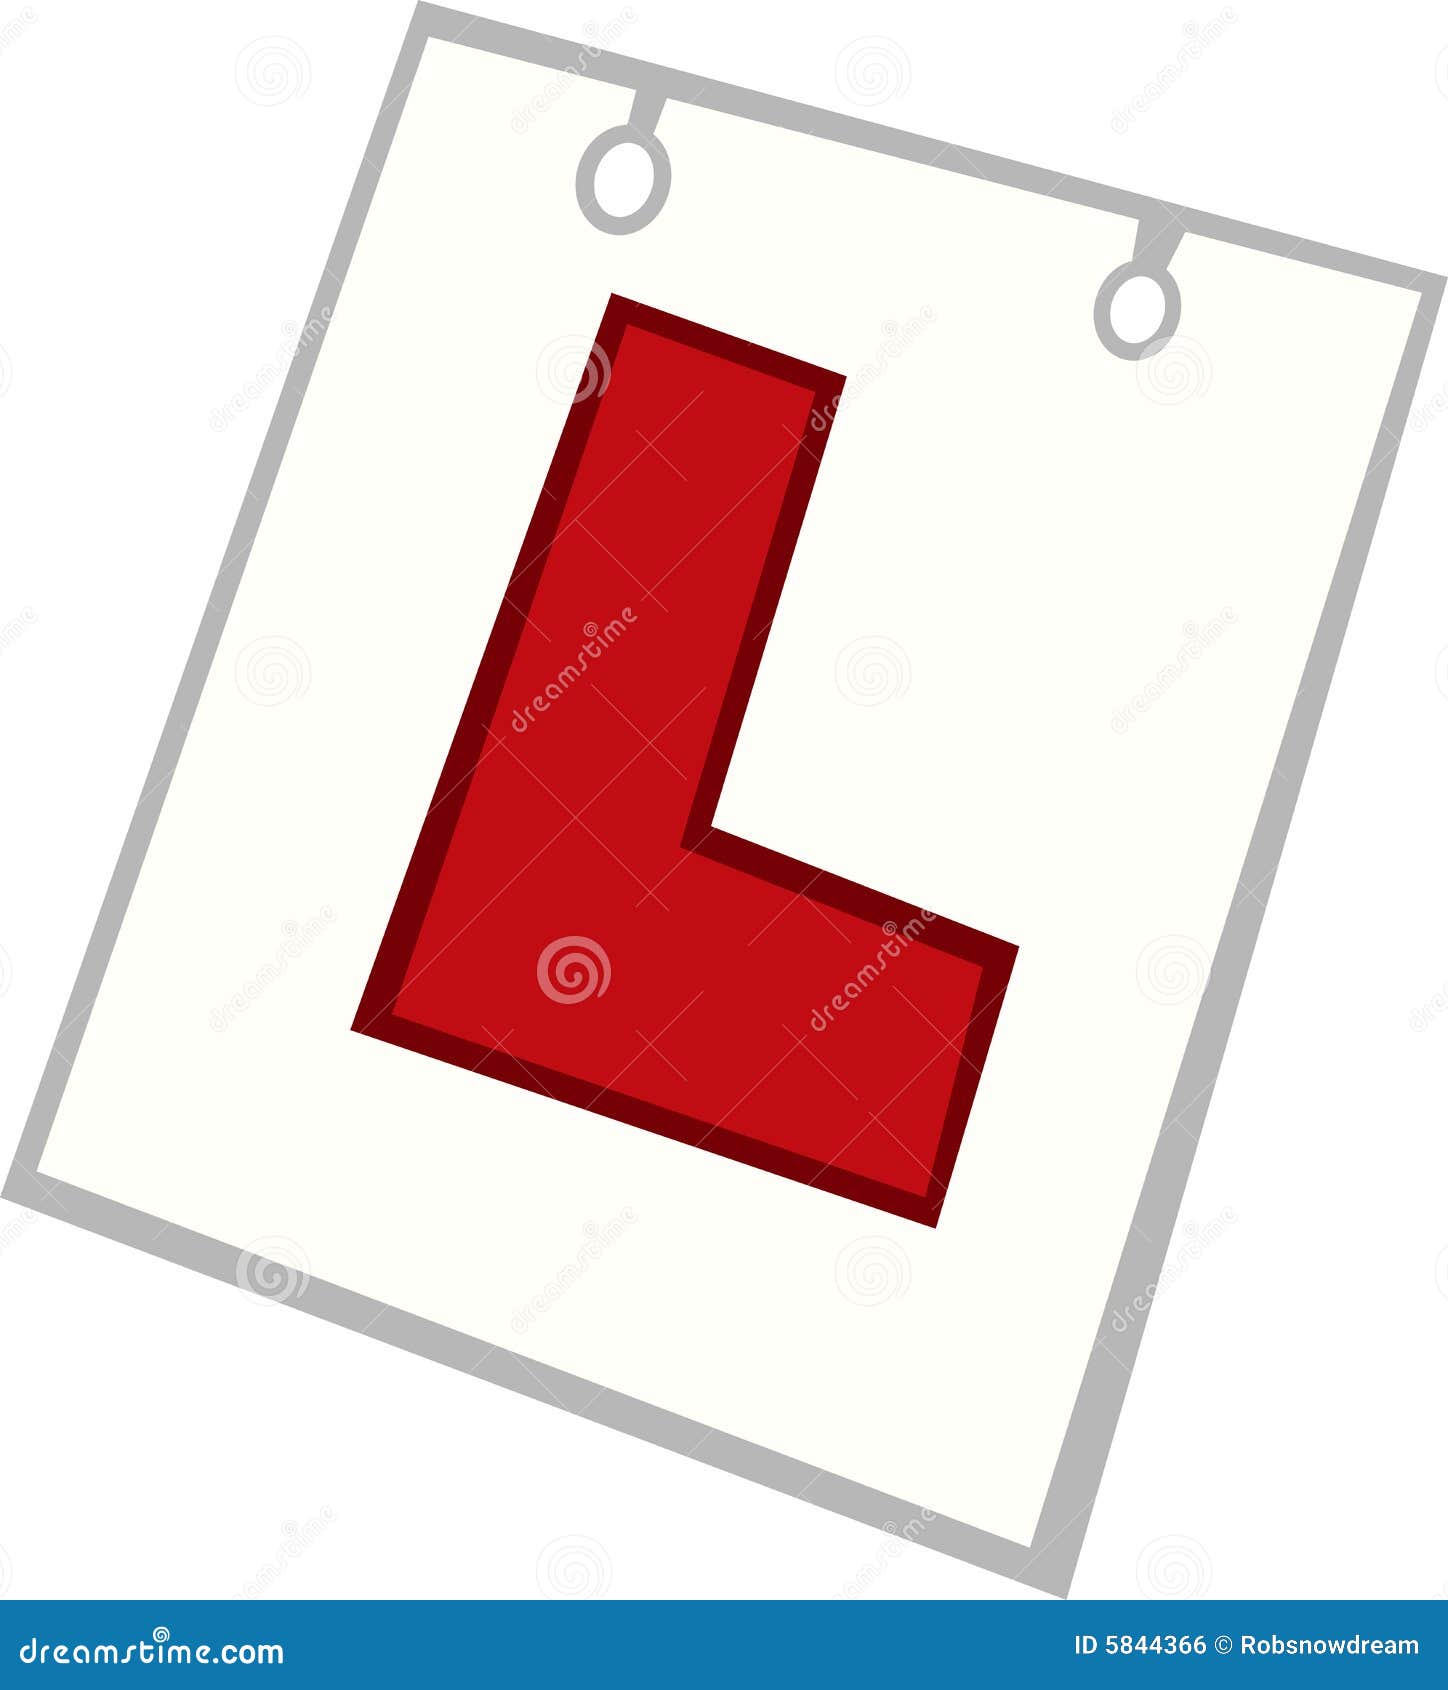 clipart passing driving test - photo #41